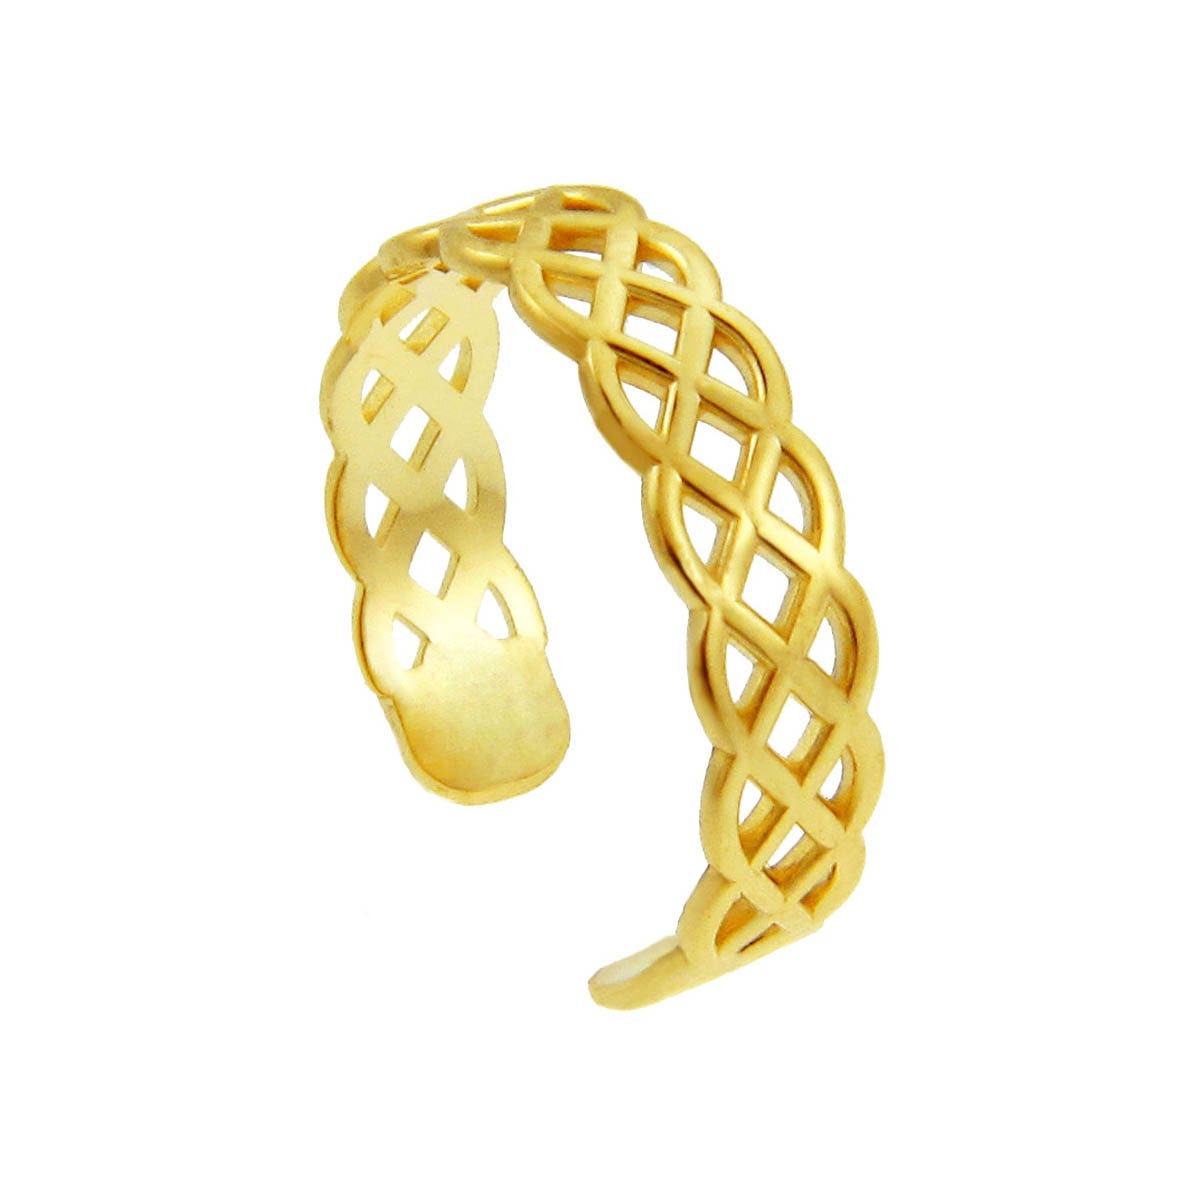 Gents Gold Ring - Gold Boutique GOOFASH